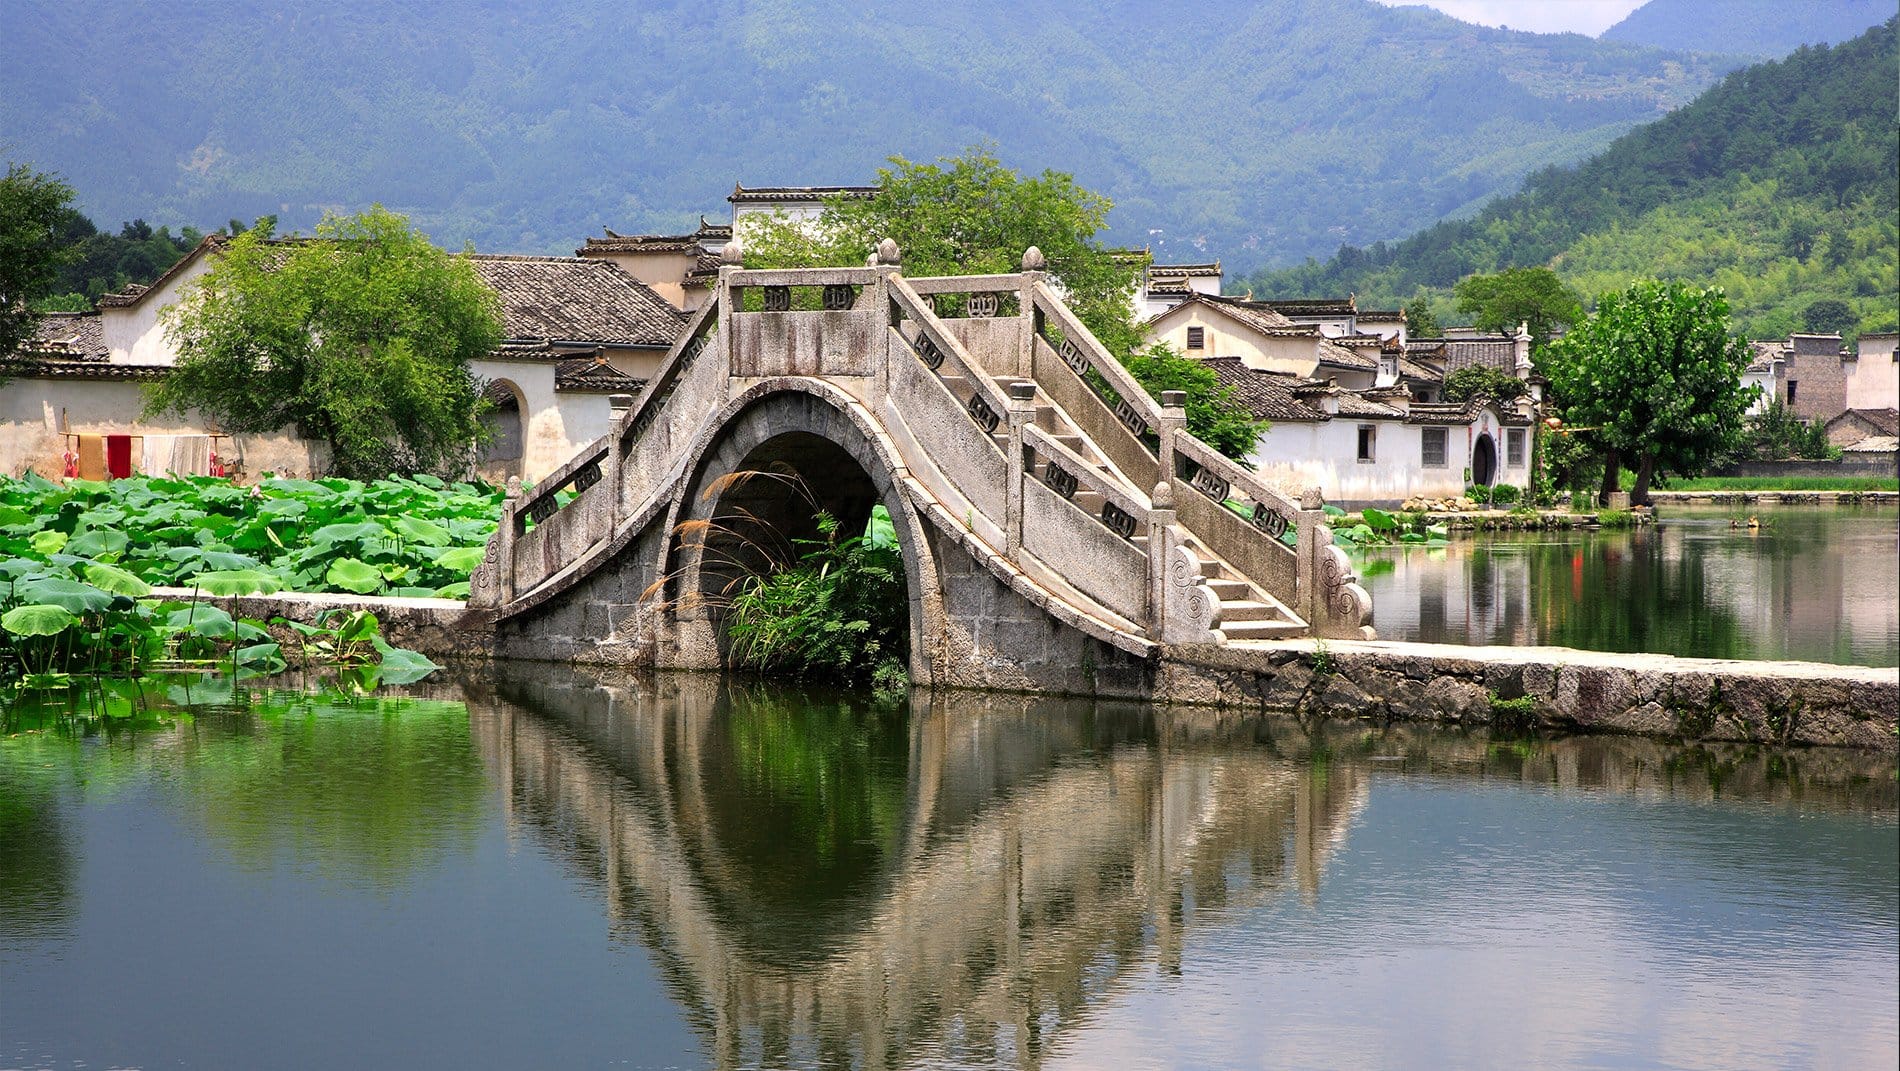 Huizhou Village Architecture~Apart from its practical uses for washing, drinking and food preparation, water plays a symbolic role in Huizhou architecture. Its collection, whether in an ornamental pond between the rooves of a courtyard house or outside a village, was considered a store of good fortune.